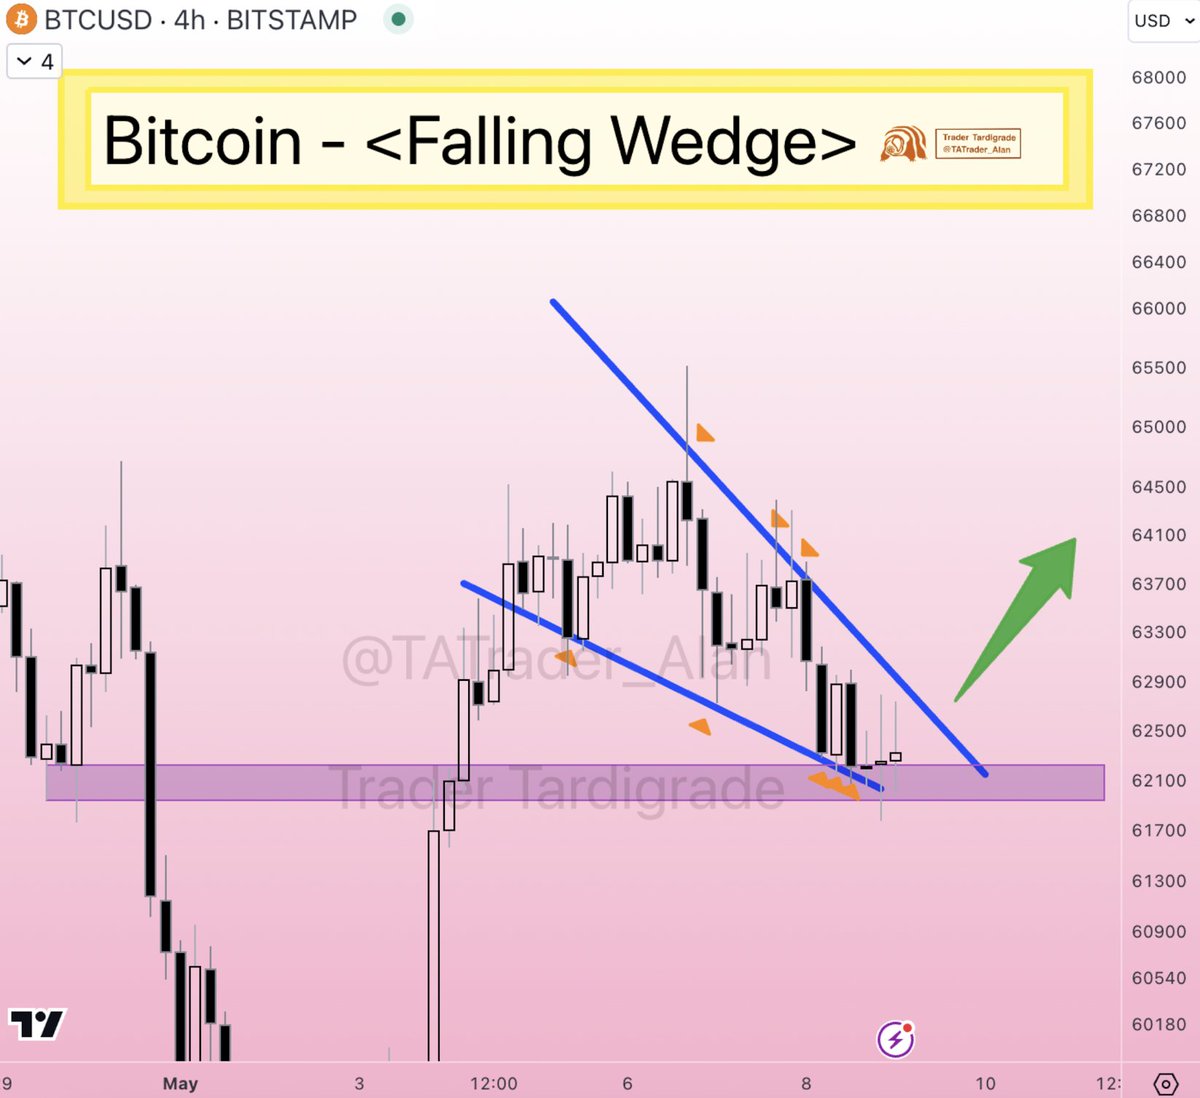 #Bitcoin 4-hour chart has shown a Falling Wedge🔥 ❇️It is a bullish pattern starting with wide at the top and then it contracts as prices move lower. This indicates the sellers are slowing down their selling or even no longer selling. Wait for the BREAKOUT 🚀